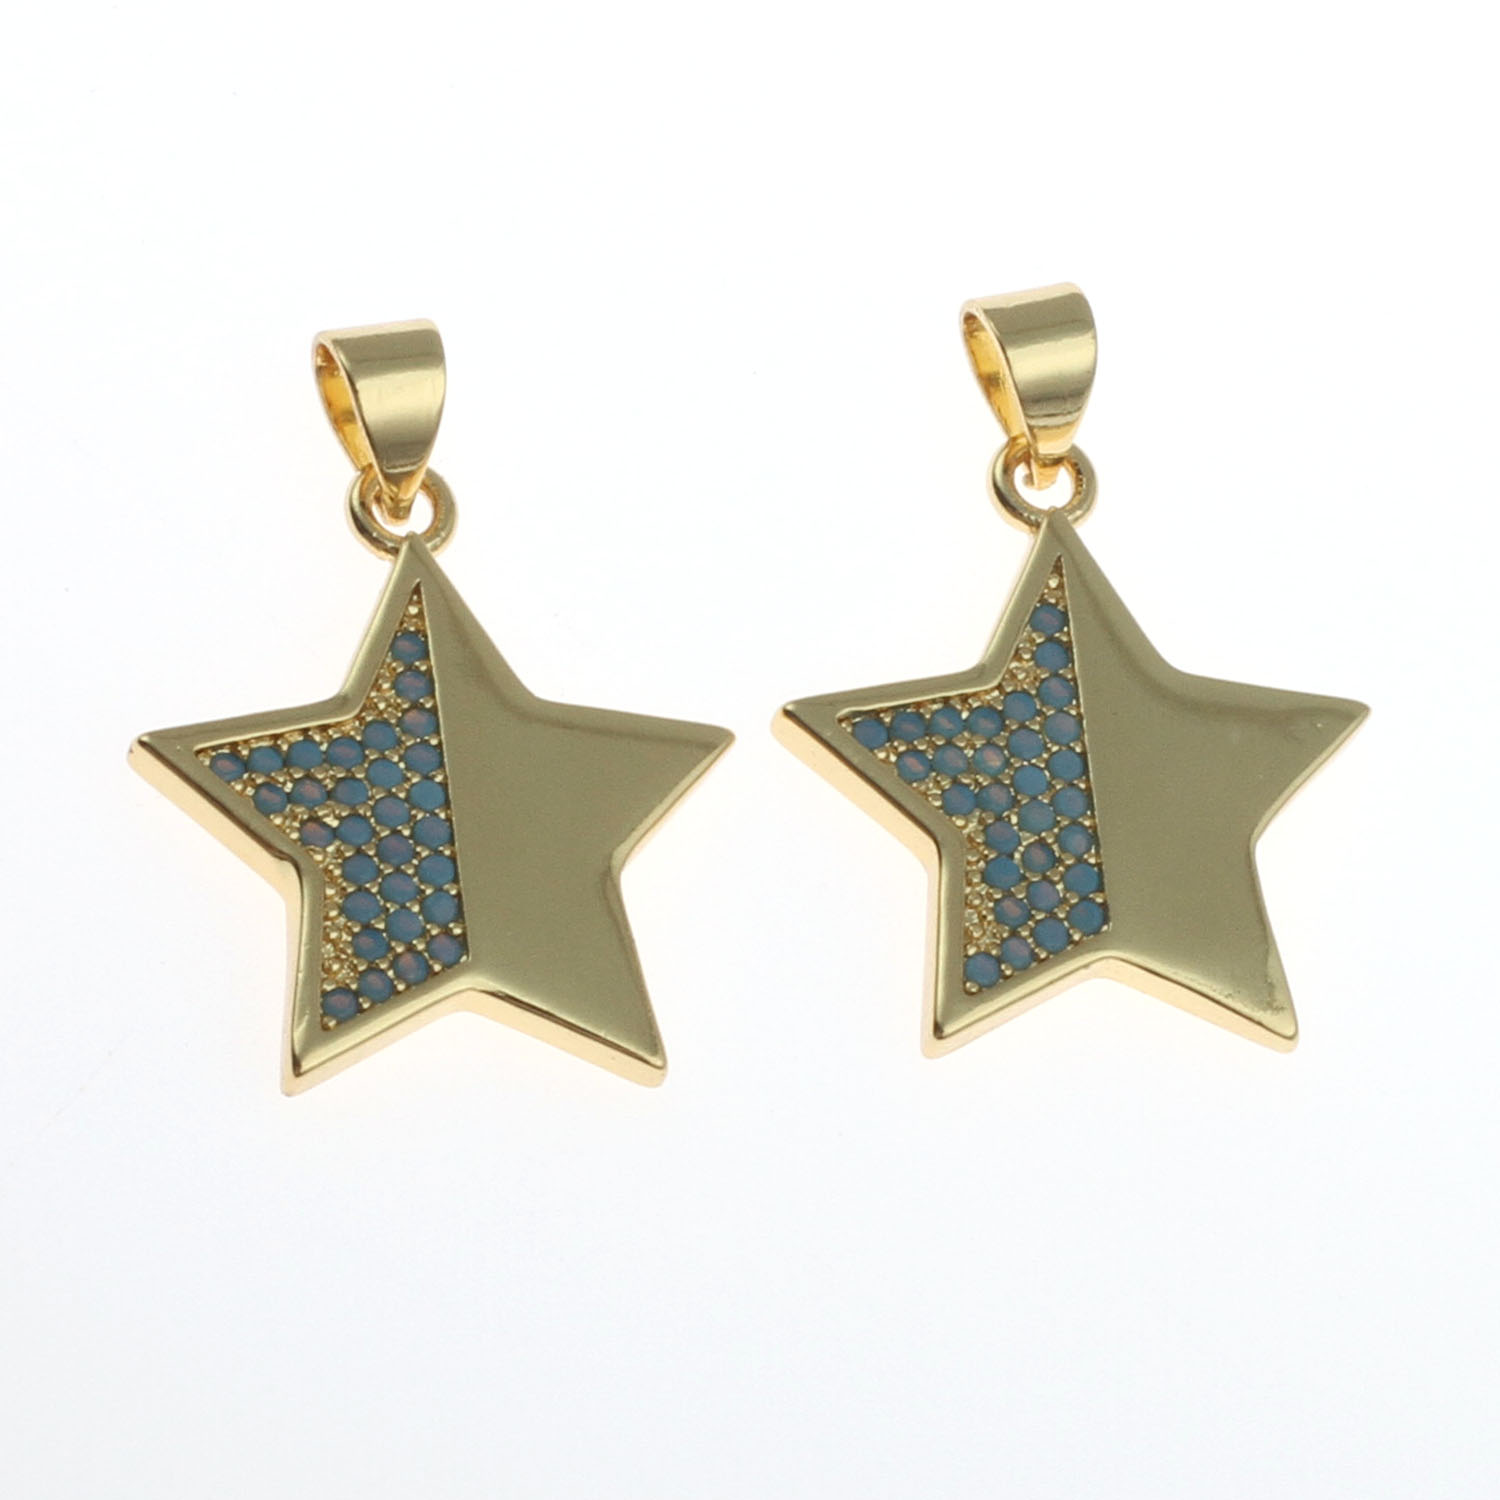 3:Gold and blue diamonds